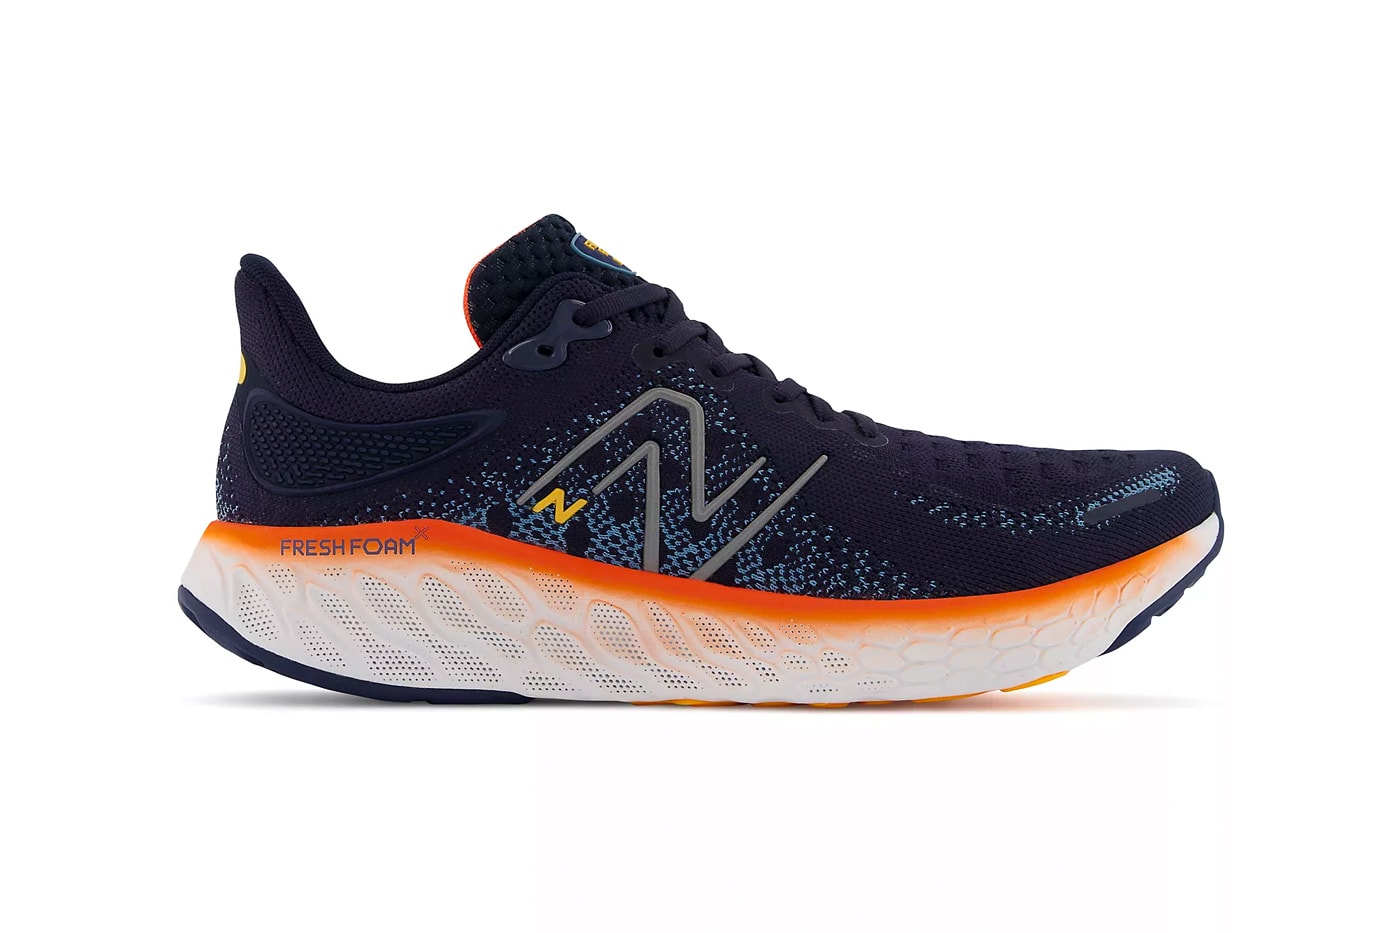 New Balance Fresh Foam X 1080v12 The best running shoes right now